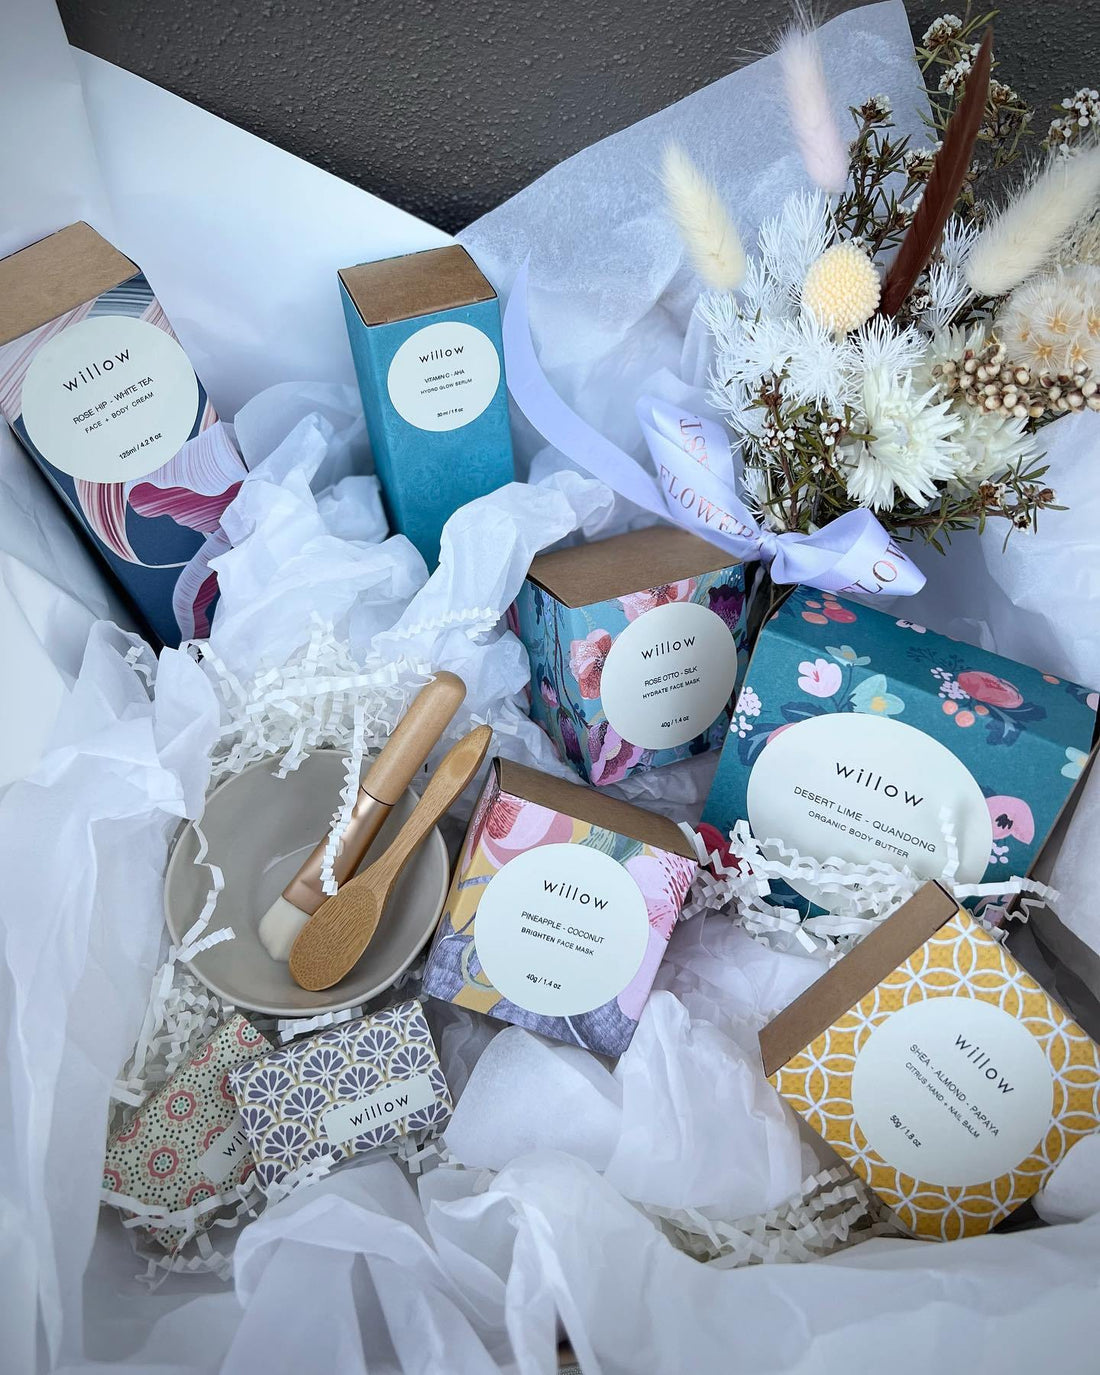 Our latest Hampers are now live on our website! Head over to spoil your loved ones and maybe yoursel - Flowers Gold Coast